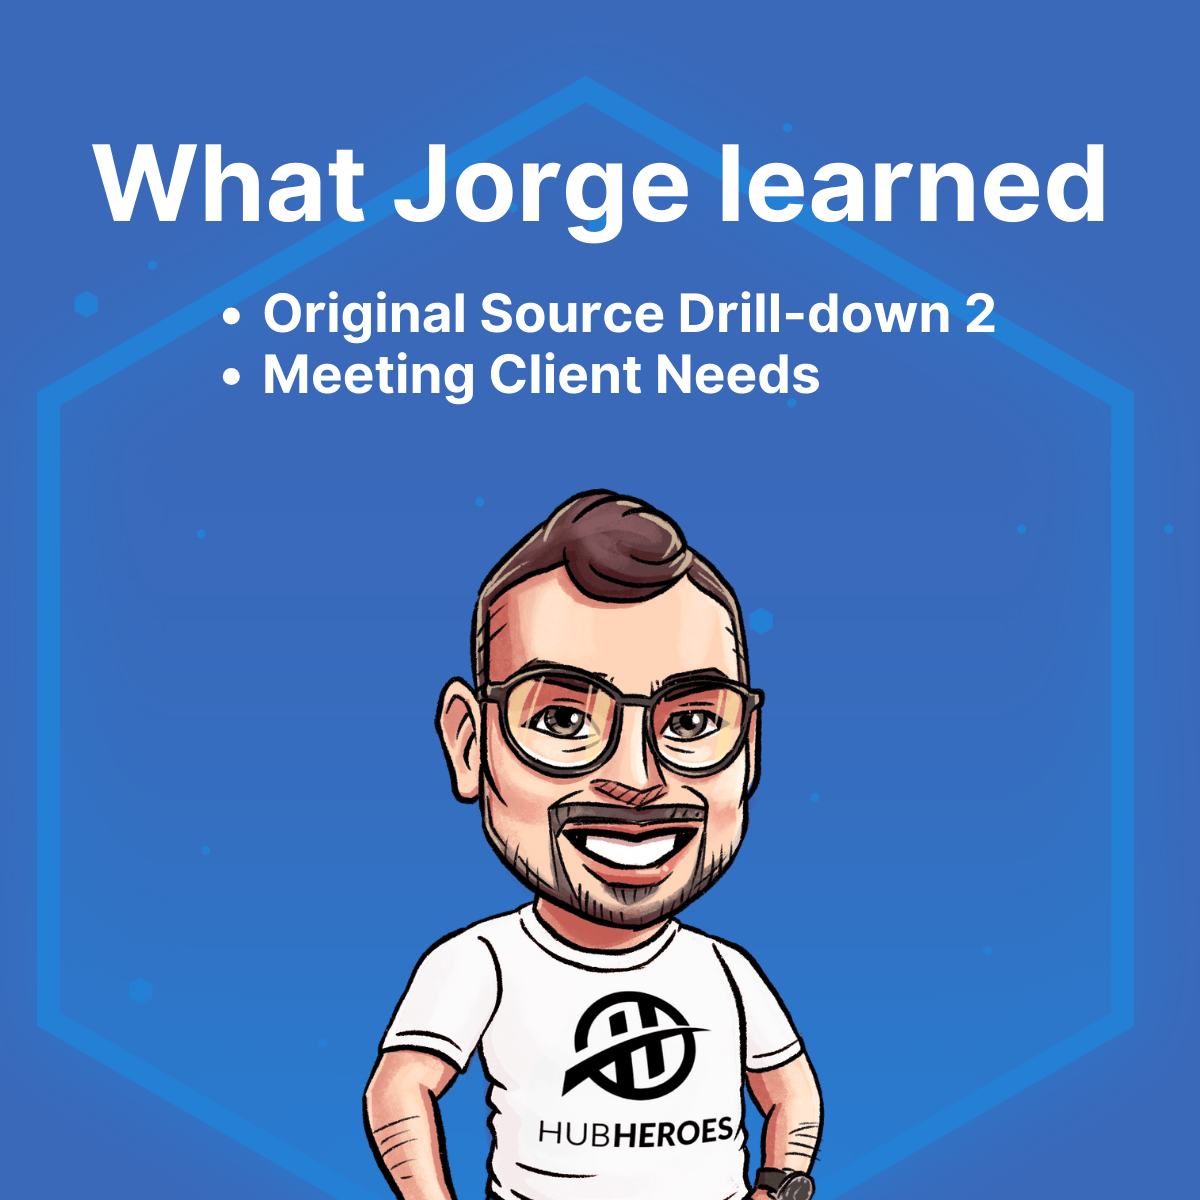 What Jorge learned: Original Source Drill-down 2 and Meeting Client Needs